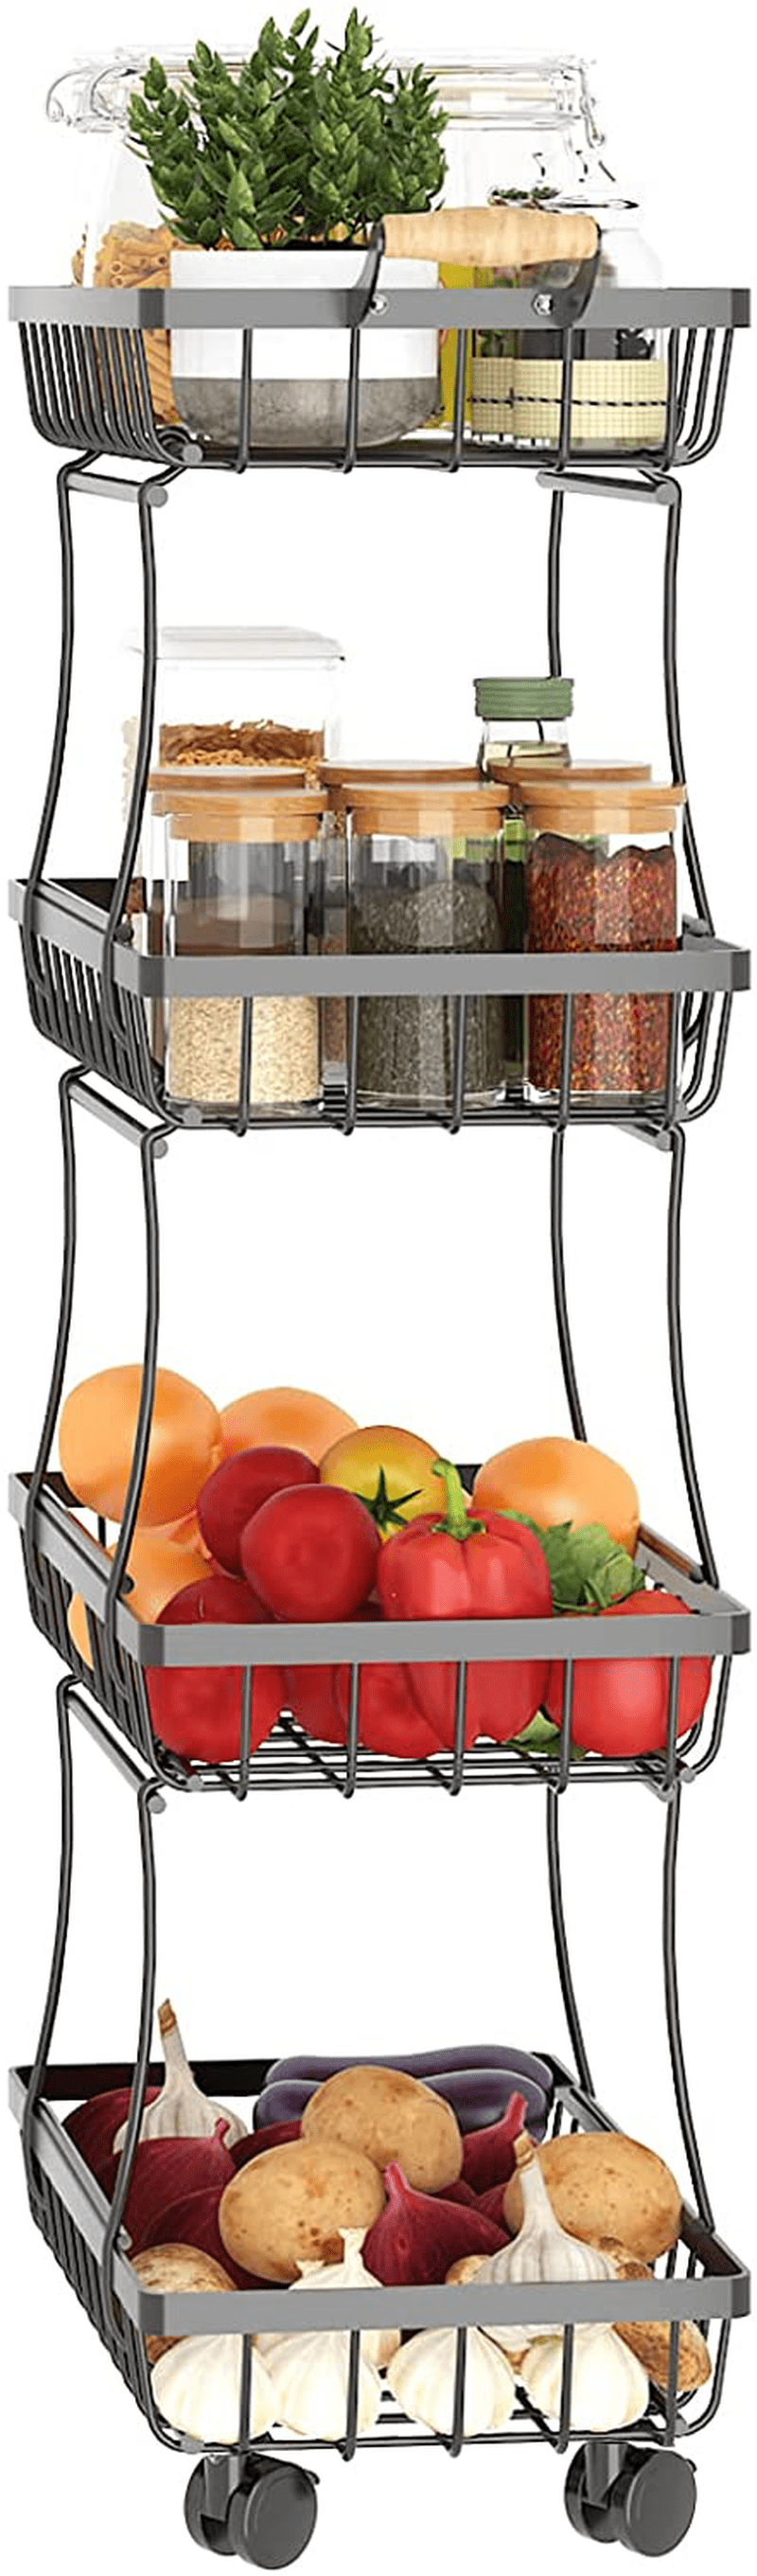 CHLORYARD Fruit Basket for Kitchen, Detachable 5-Tier Stackable Baskets with Tabletop, Wire Organizer Basket with Wheels, Kitchen Storage Cart for Onions and Potatoes, Produce Storage Bins for Pantry